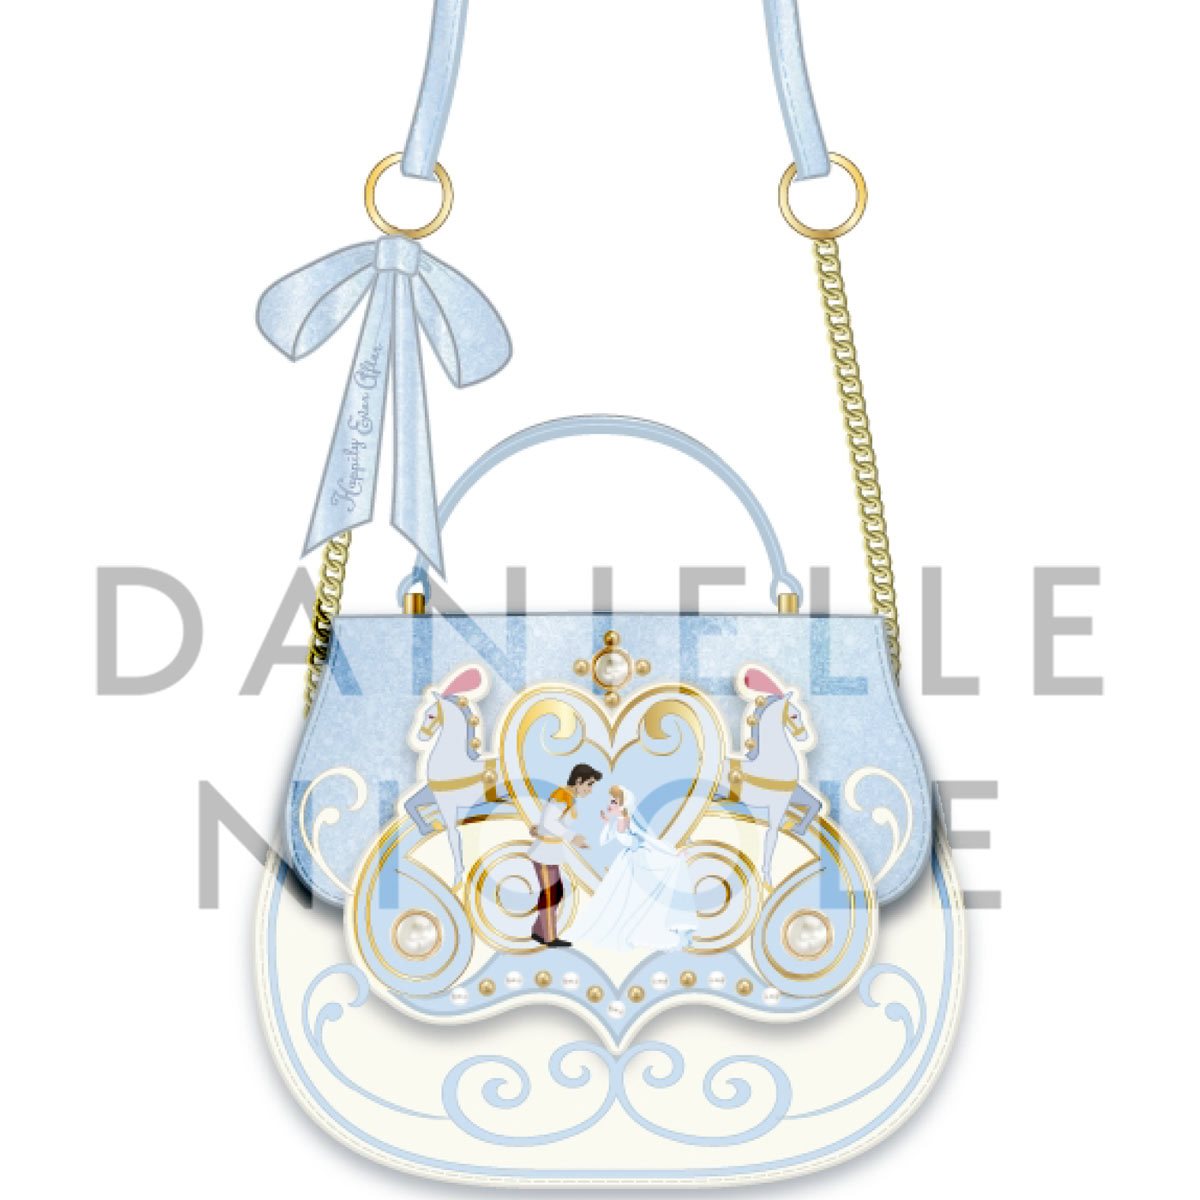 Cinderella-Inspired Accessories and Decor Items